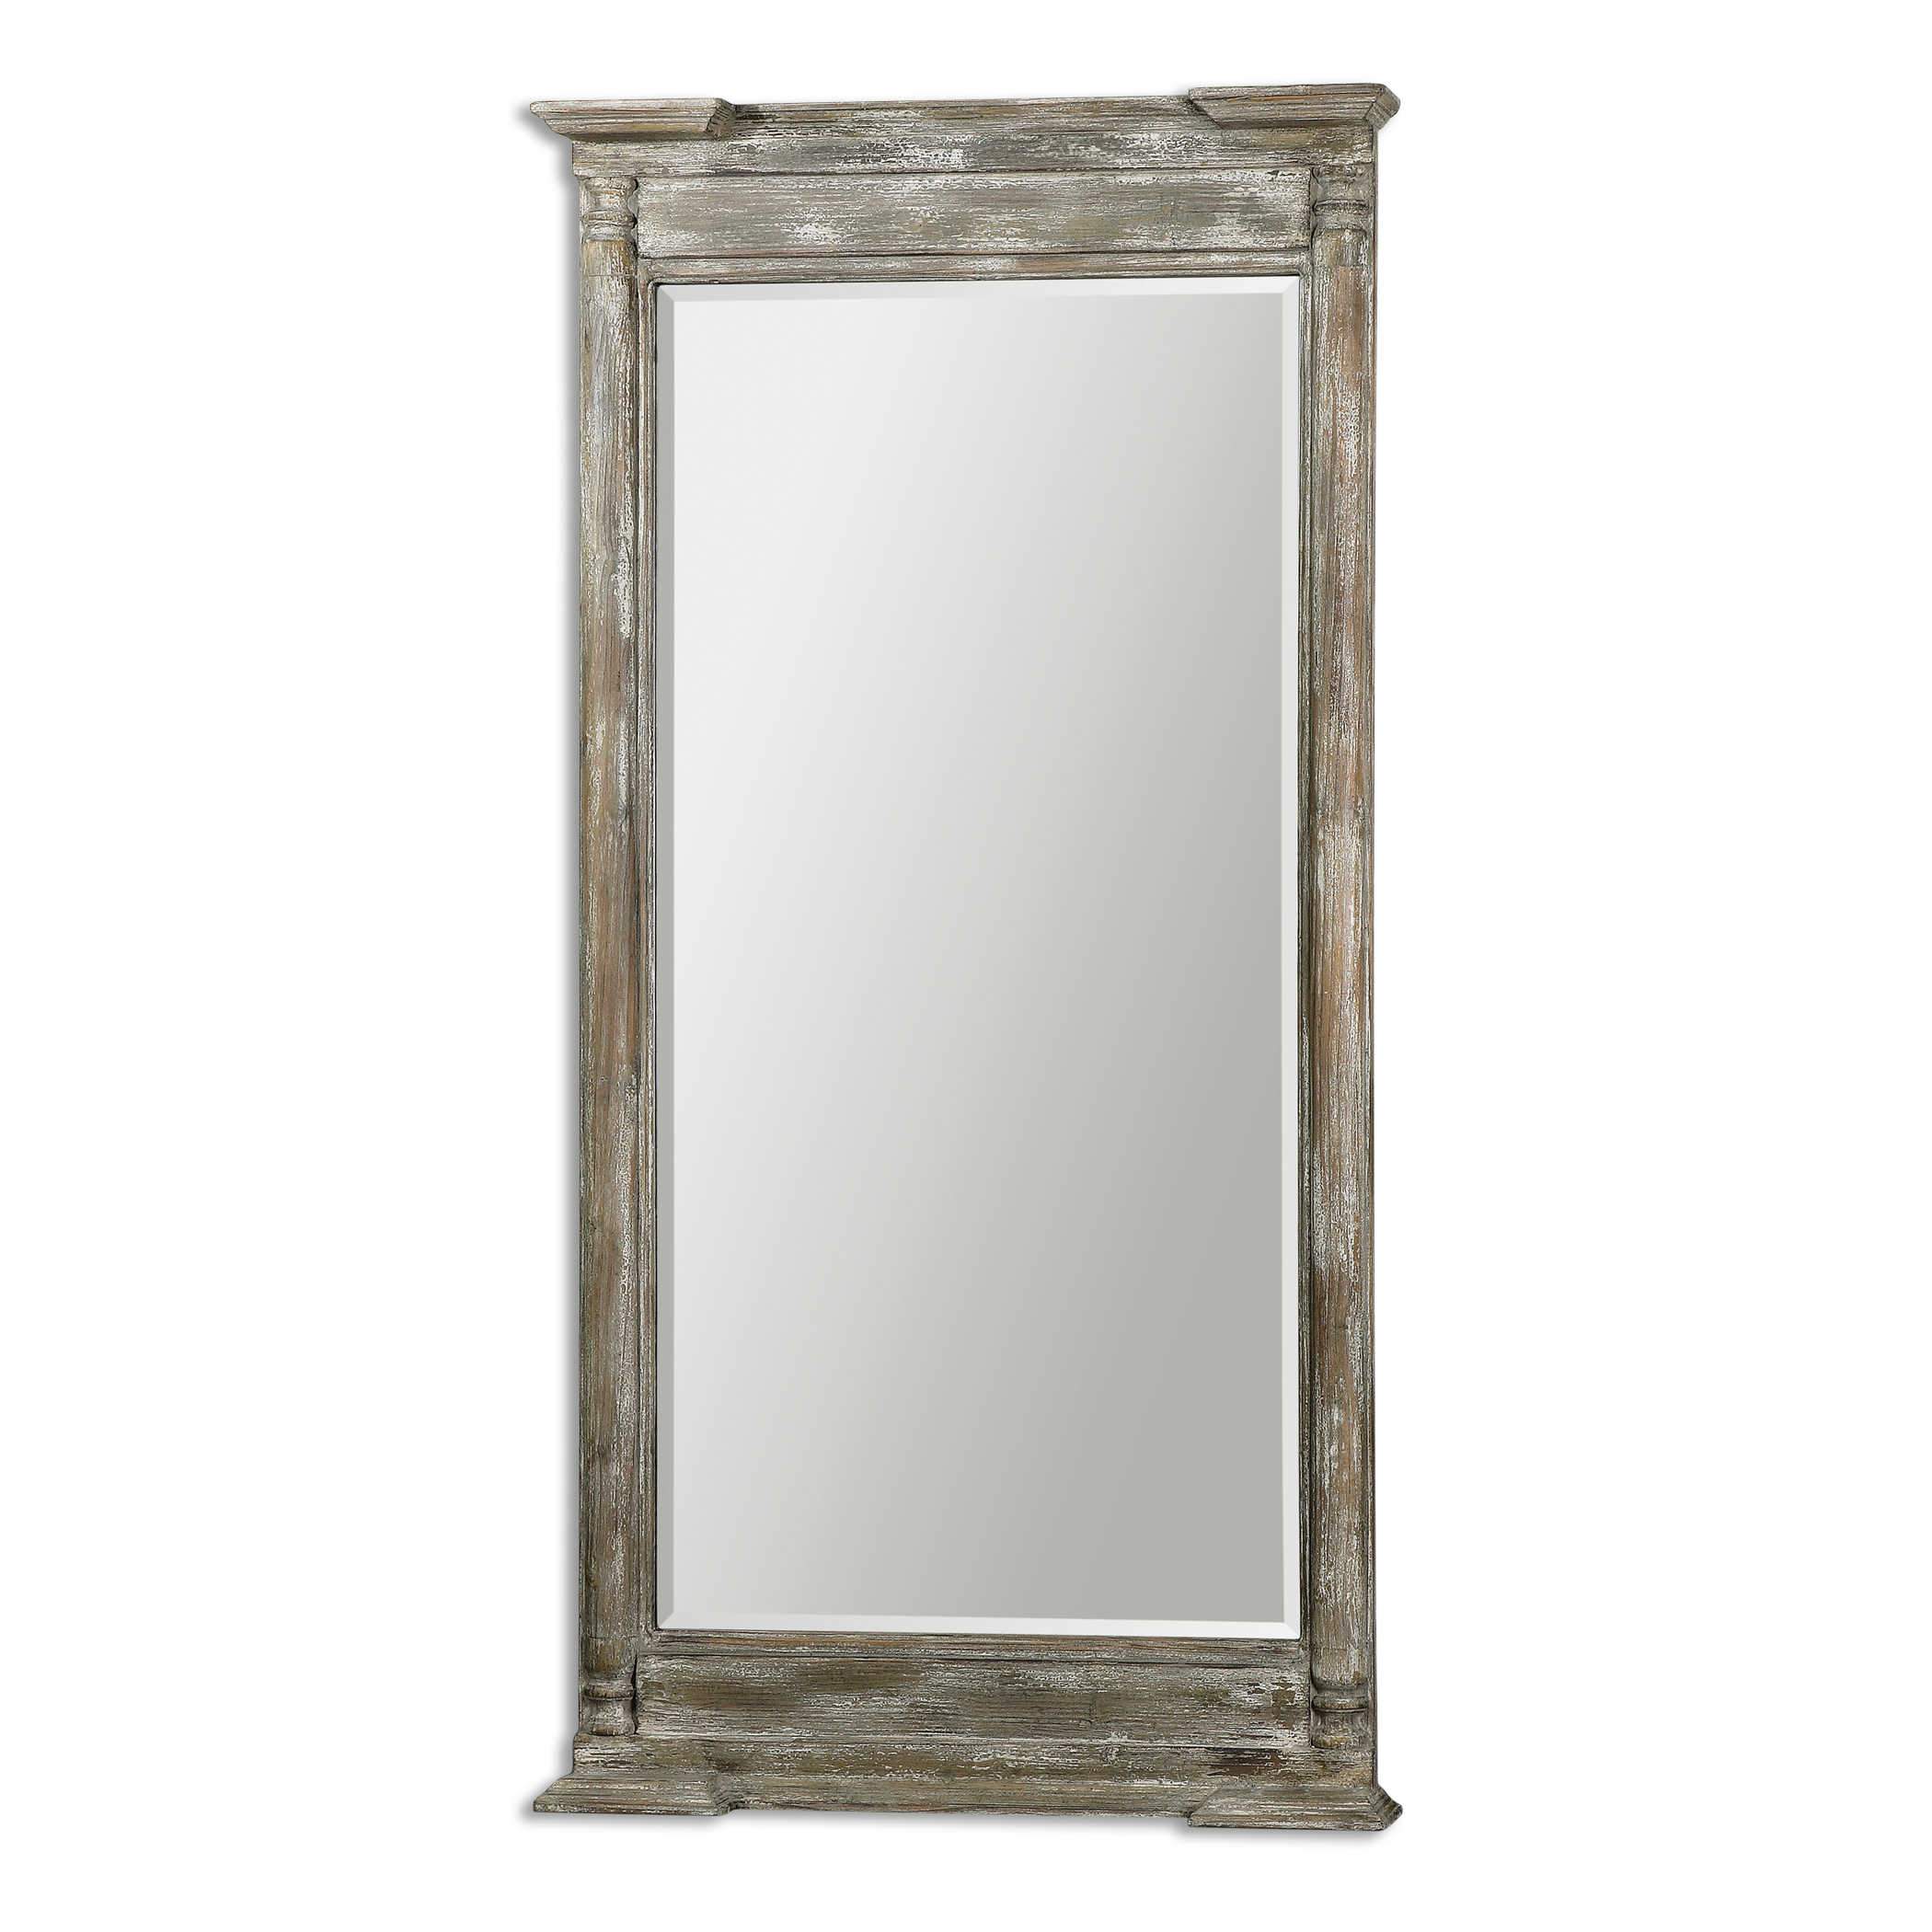 Uttermost Home Motor Freight - Rate to be Quoted Uttermost Valcellina Mirror - Shipping November